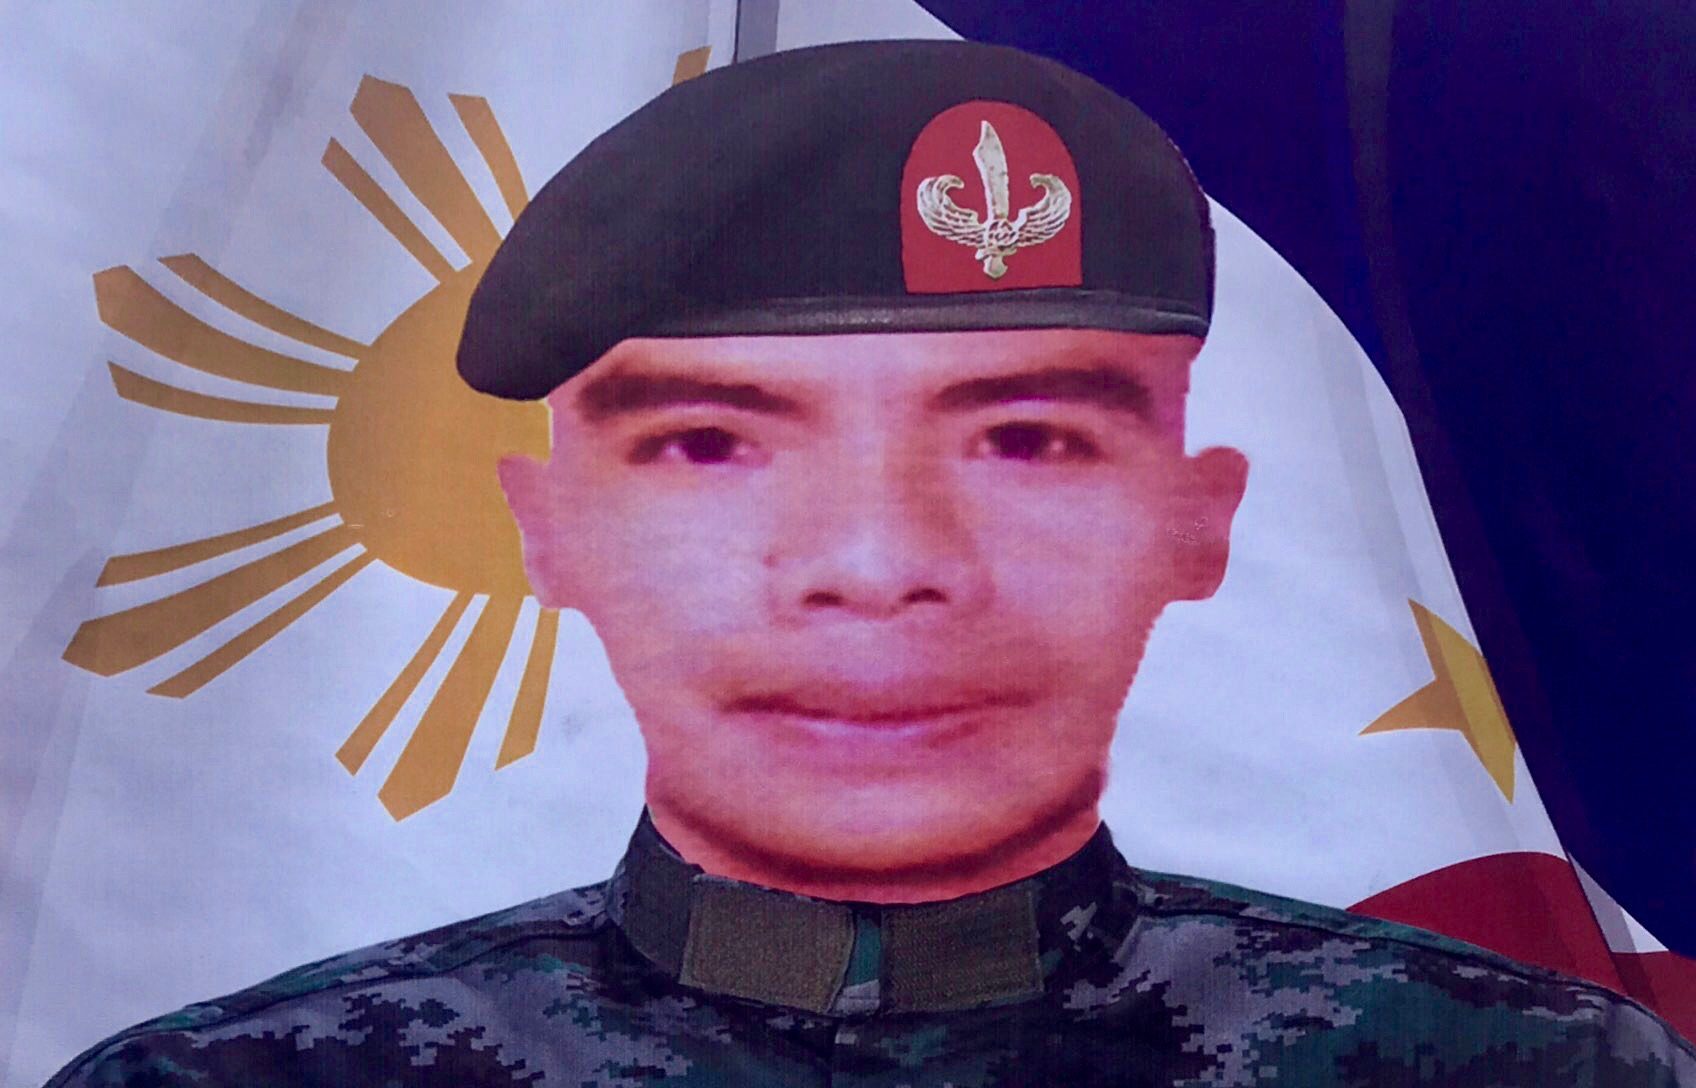 Moises Kimayong's SAF photo taken when he was admitted to the elite force. Photo courtesy of PNP-SAF 